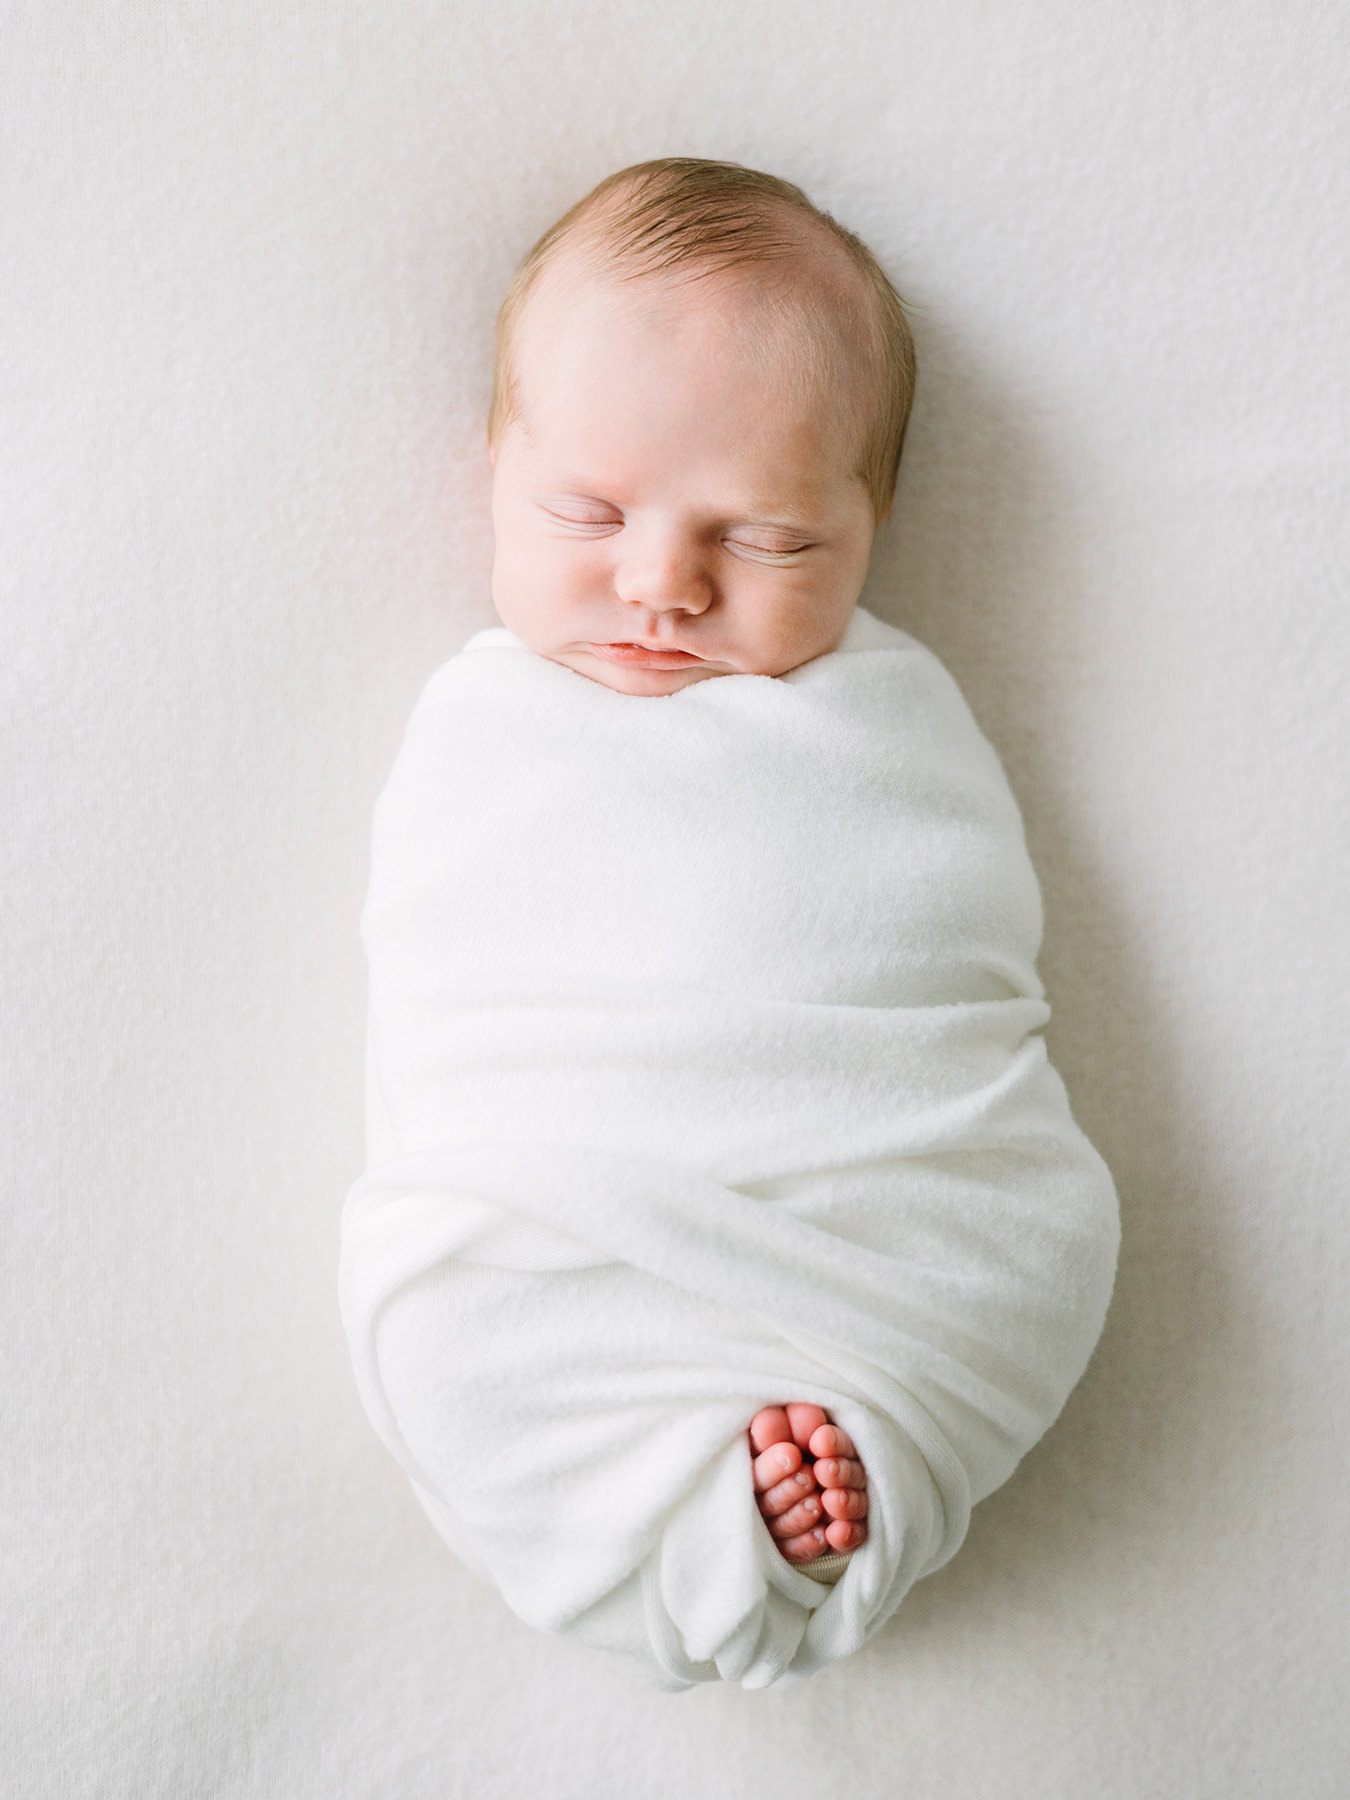 A newborn baby in a white swaddle photographed by Thousand Oaks newborn Photographer, Daniele Rose.